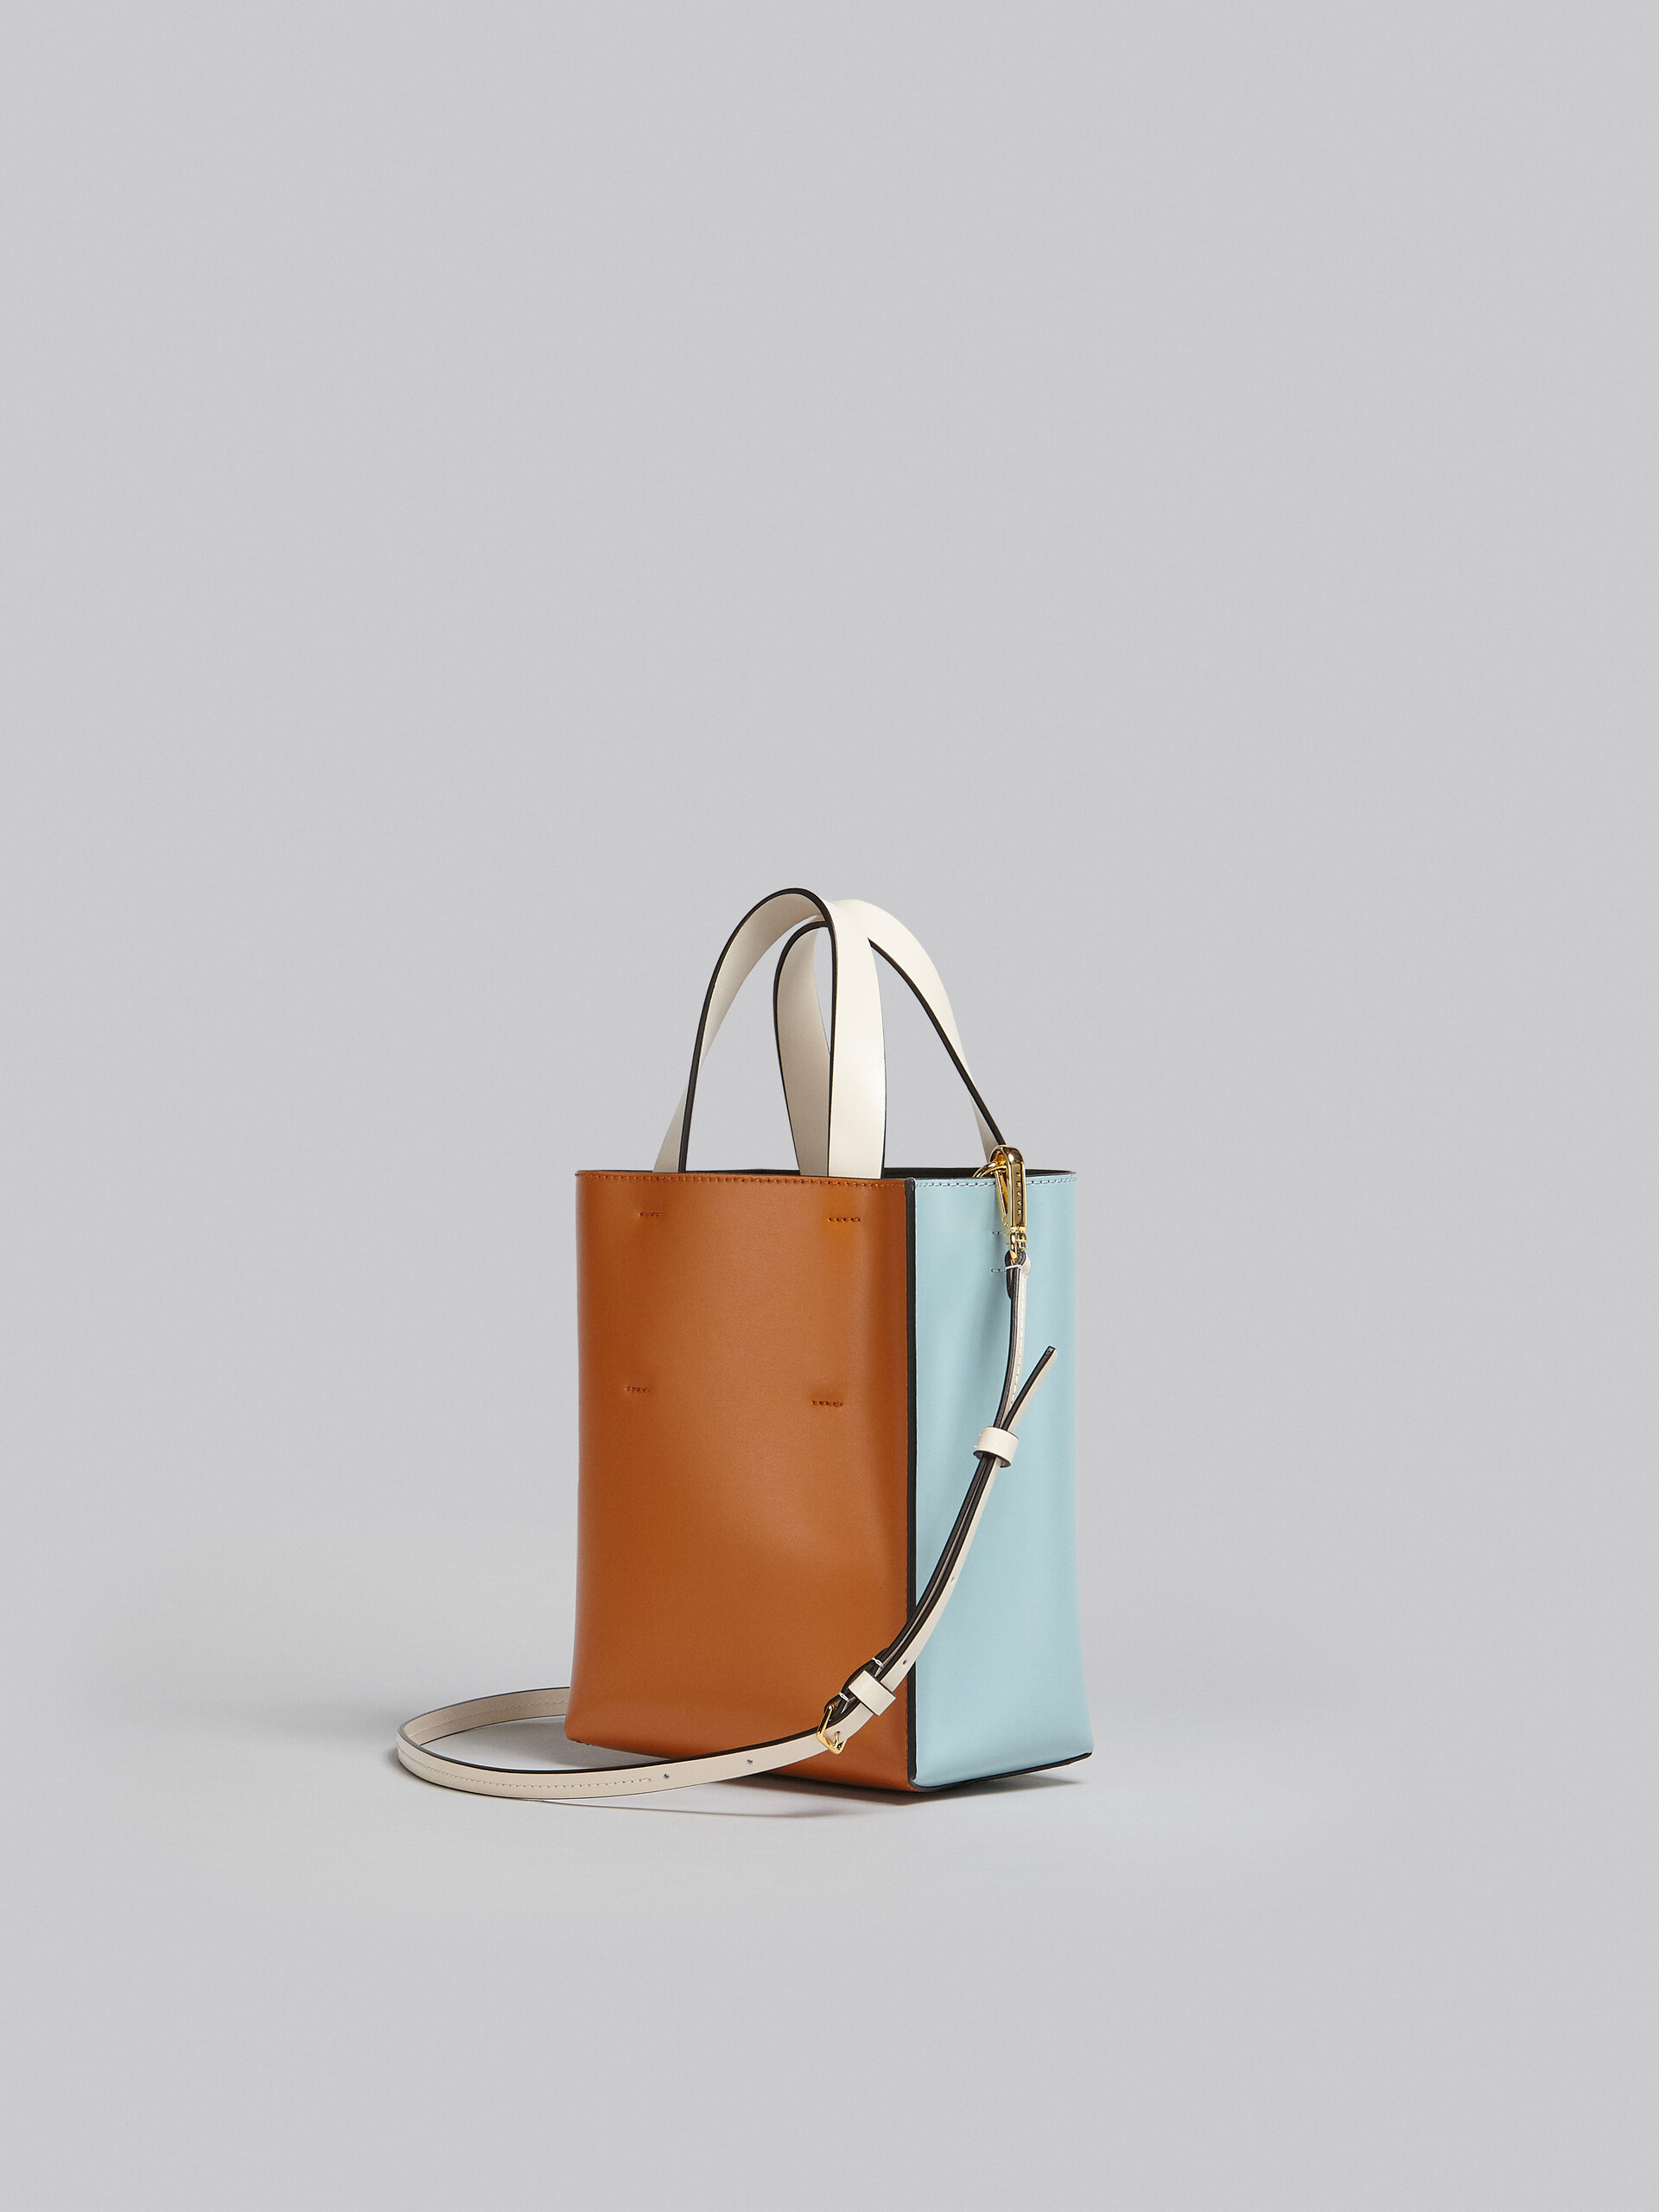 Museo Mini Bag in light blue orange and white leather - Shopping Bags - Image 3